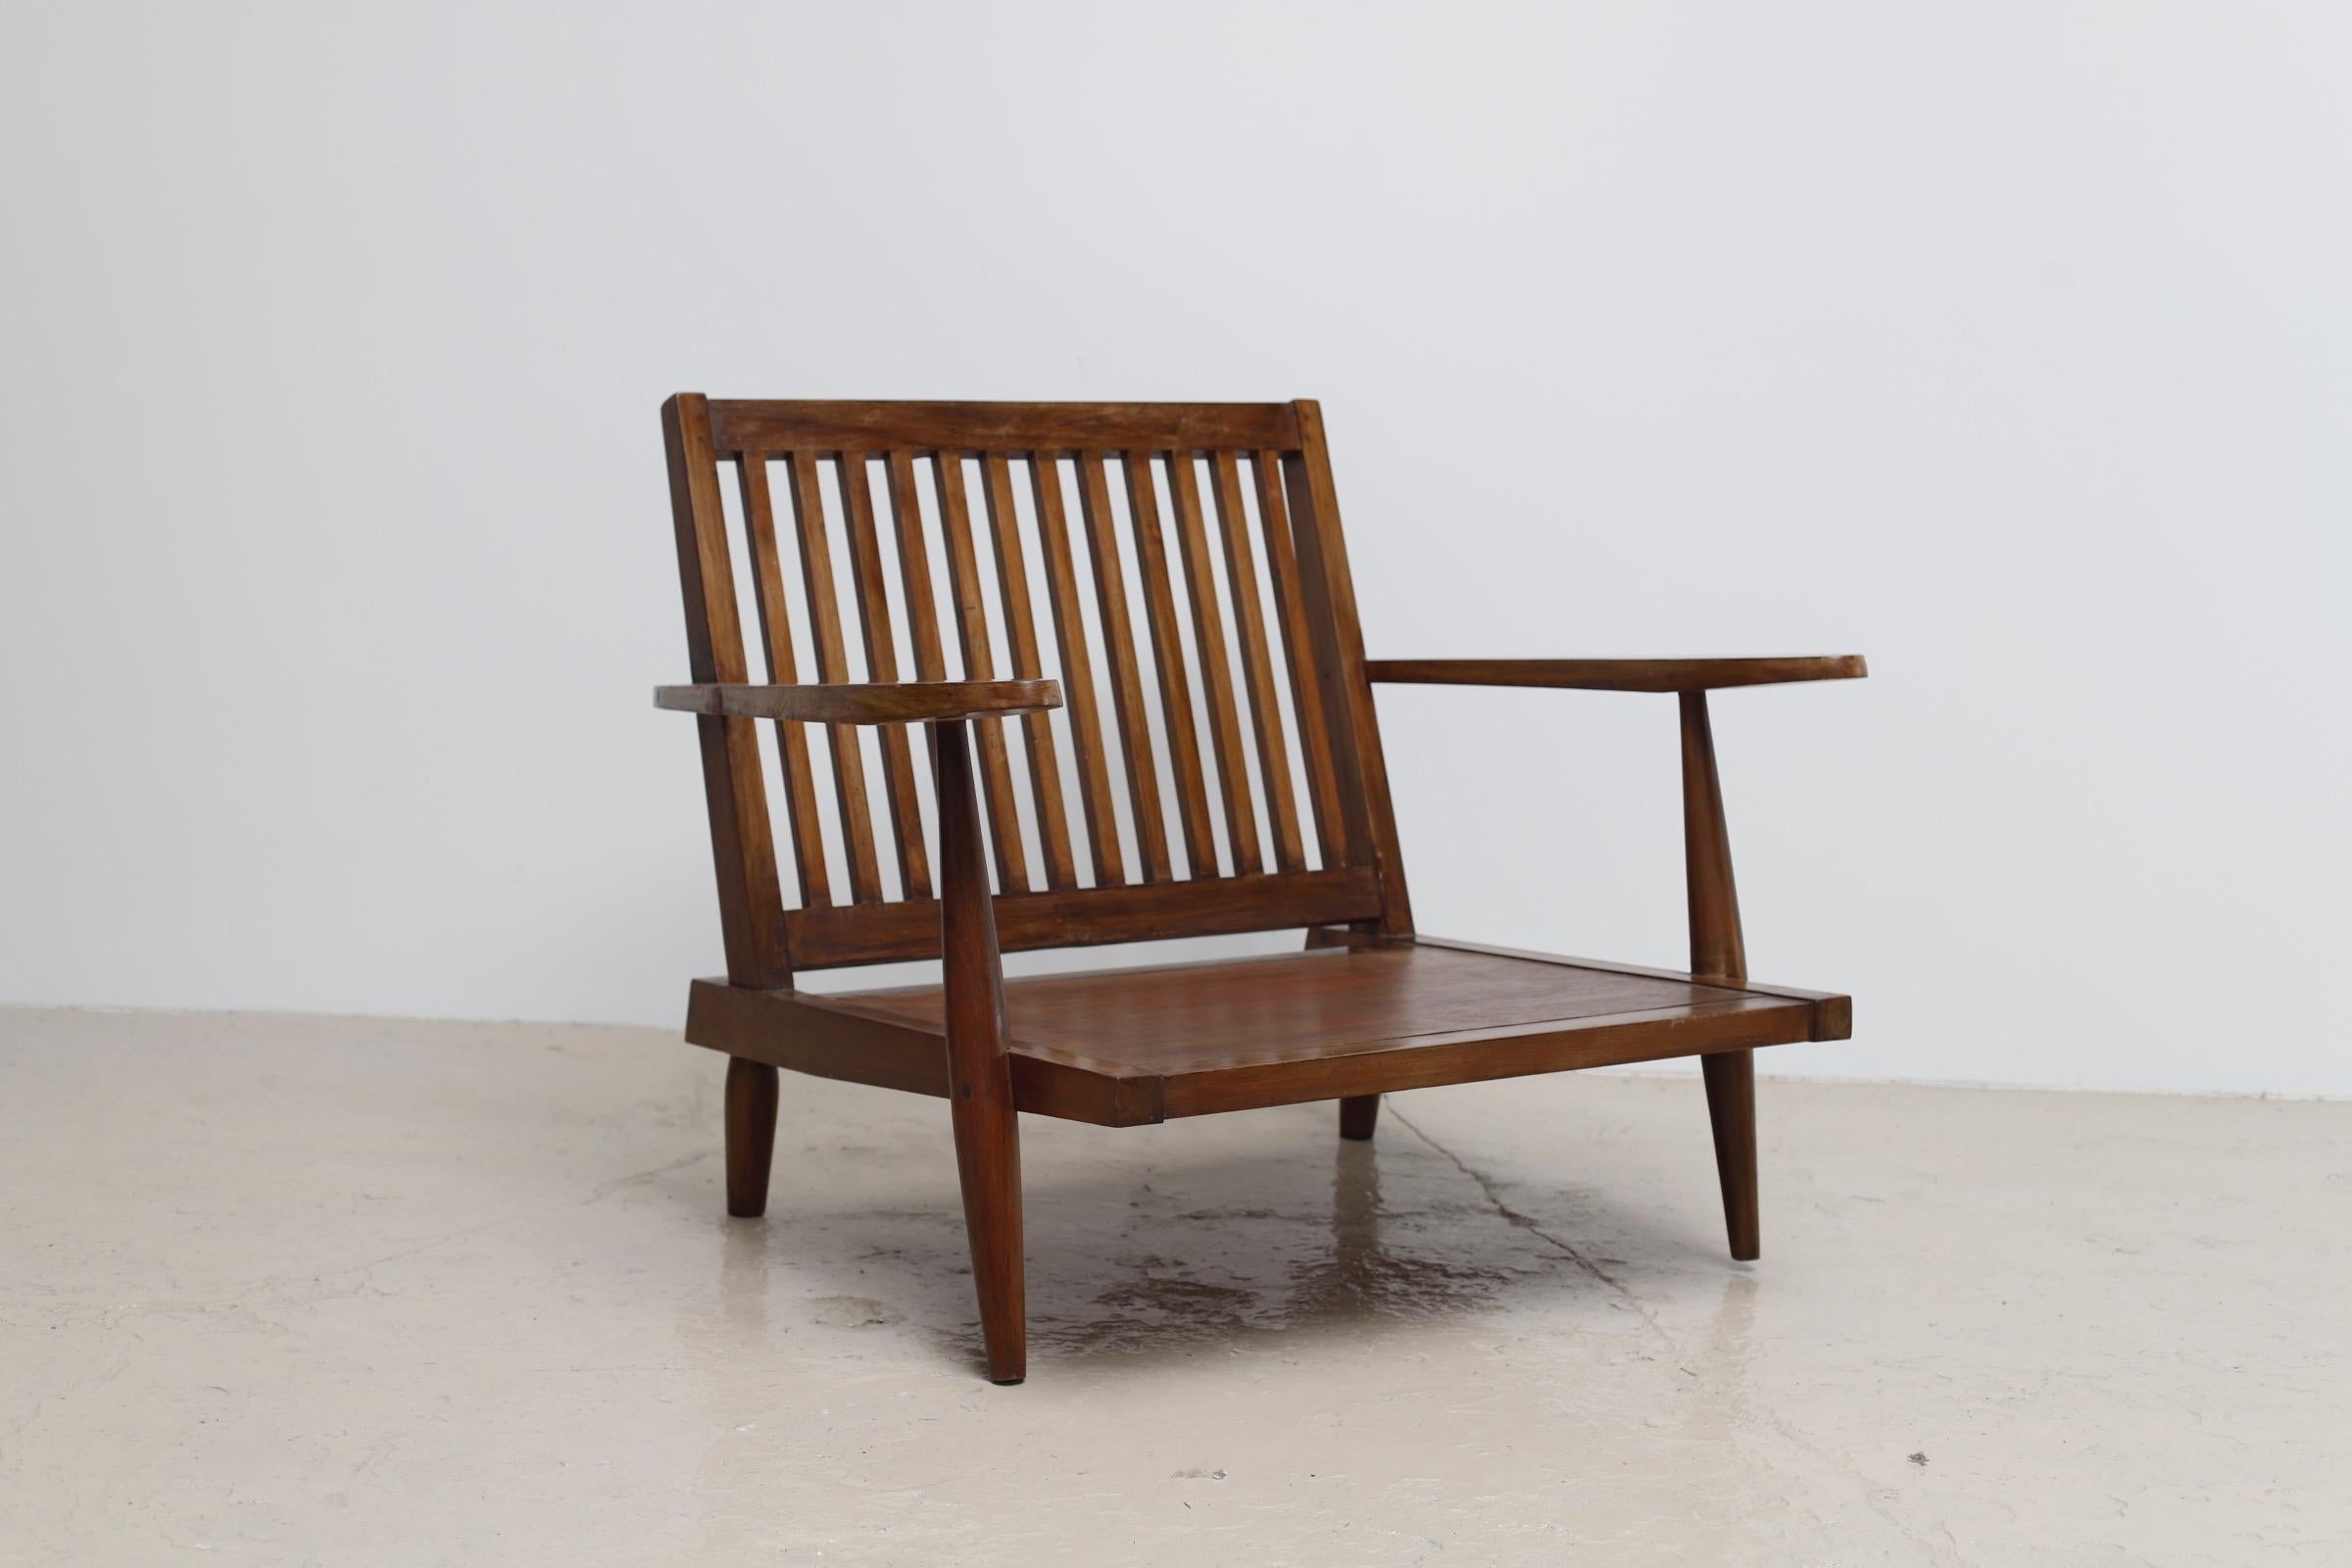 The type of wood is teak.
He visited the NID=National Institute of Design campus in India in 1964, he worked with local craftsmen to produce 32 designs and detailed drawings of furniture, including the chair.
Cushion is new one.